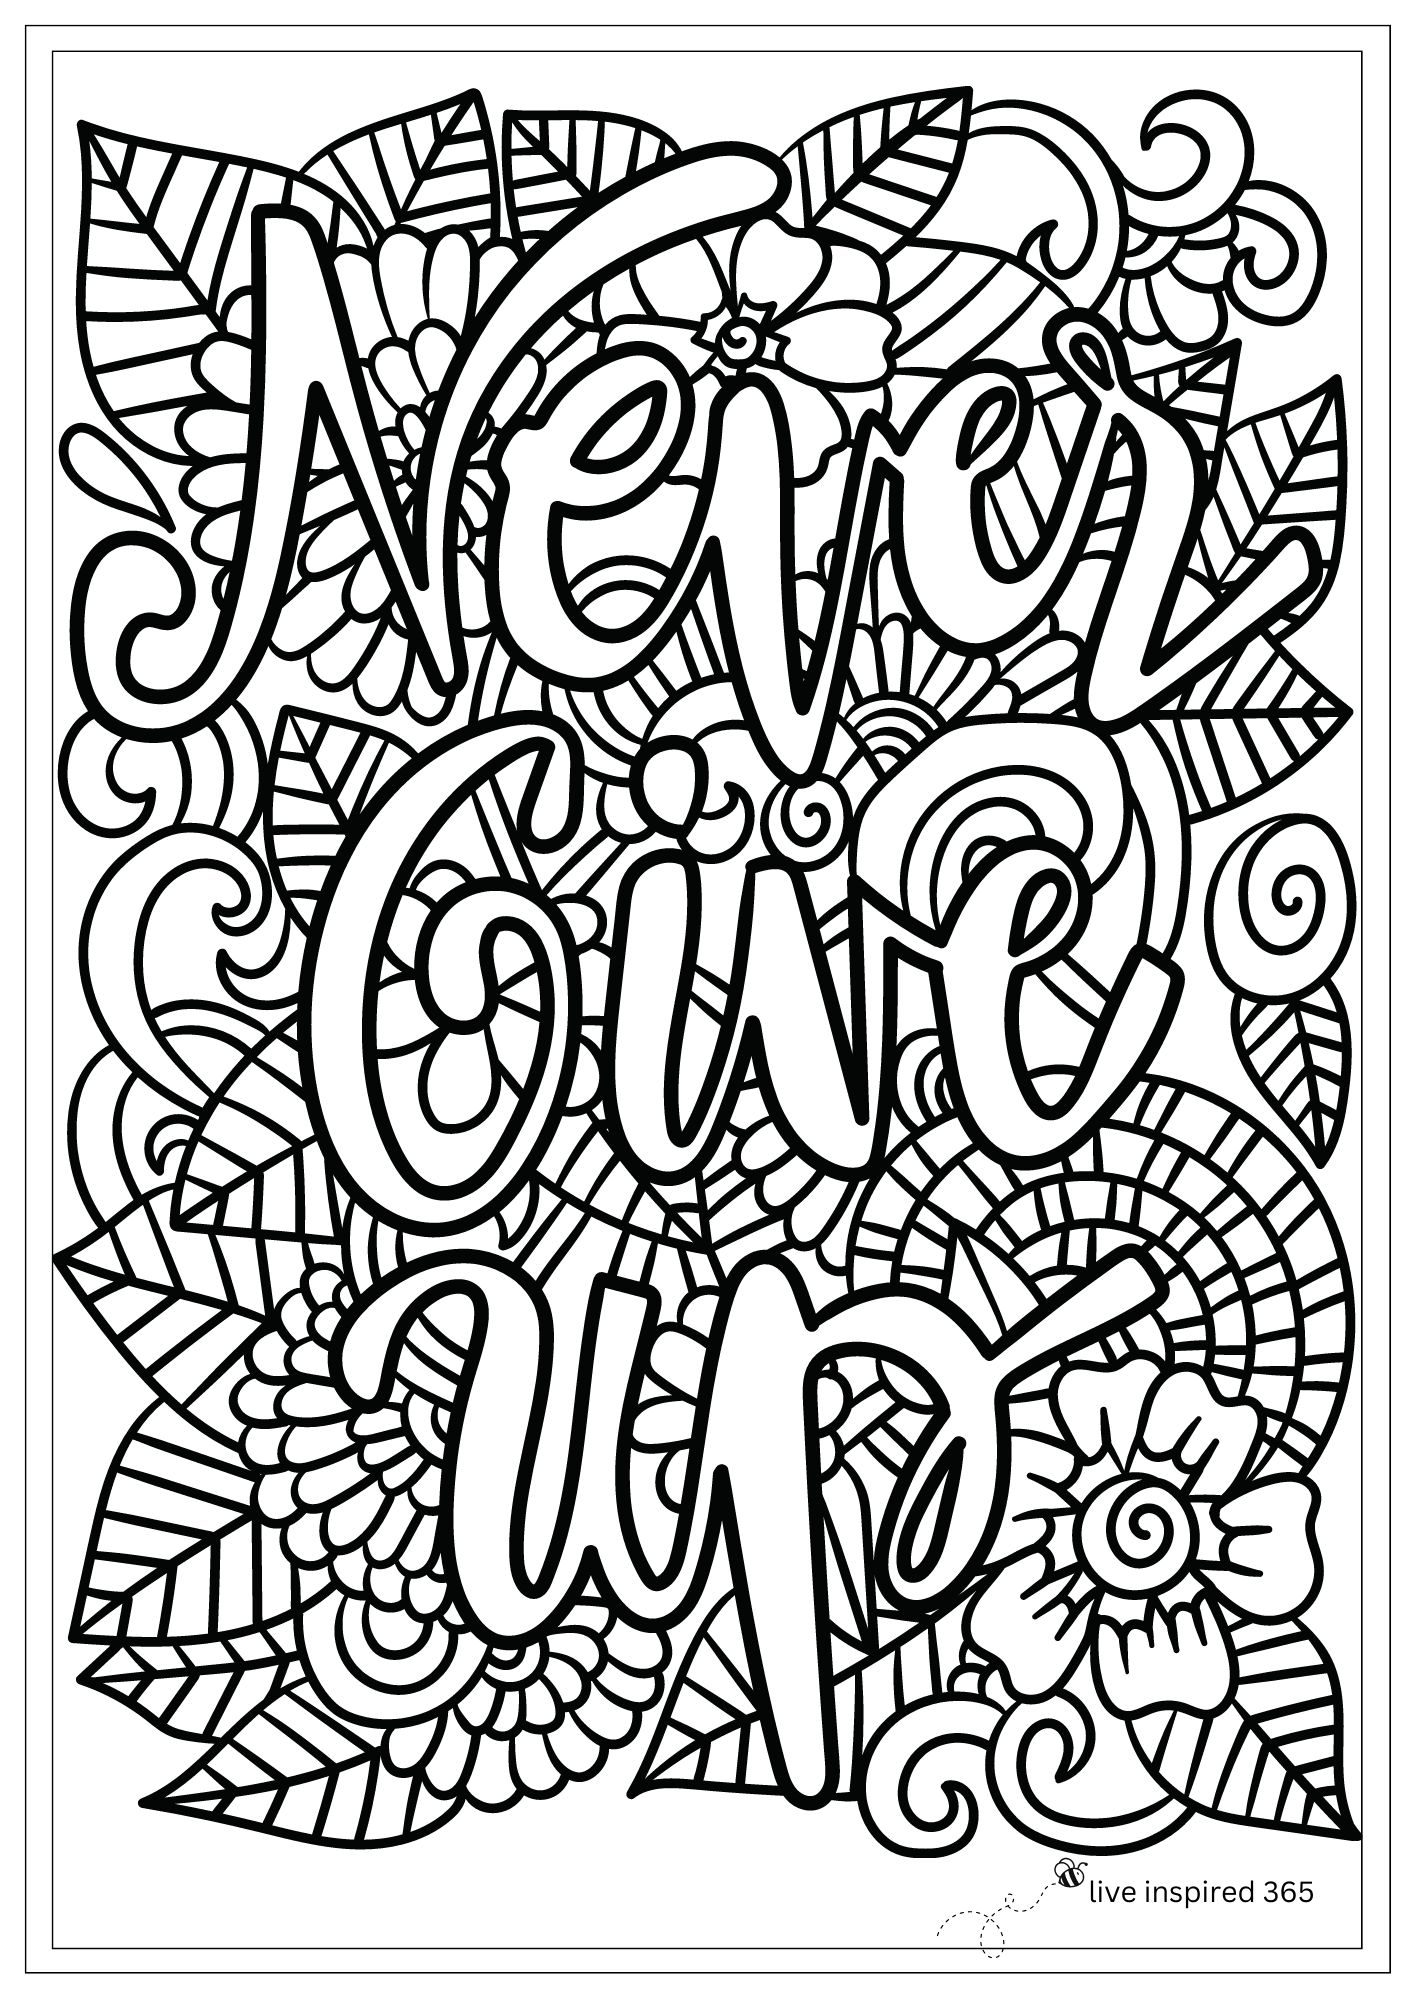 Never Give Up-Coloring Page – live inspired 365